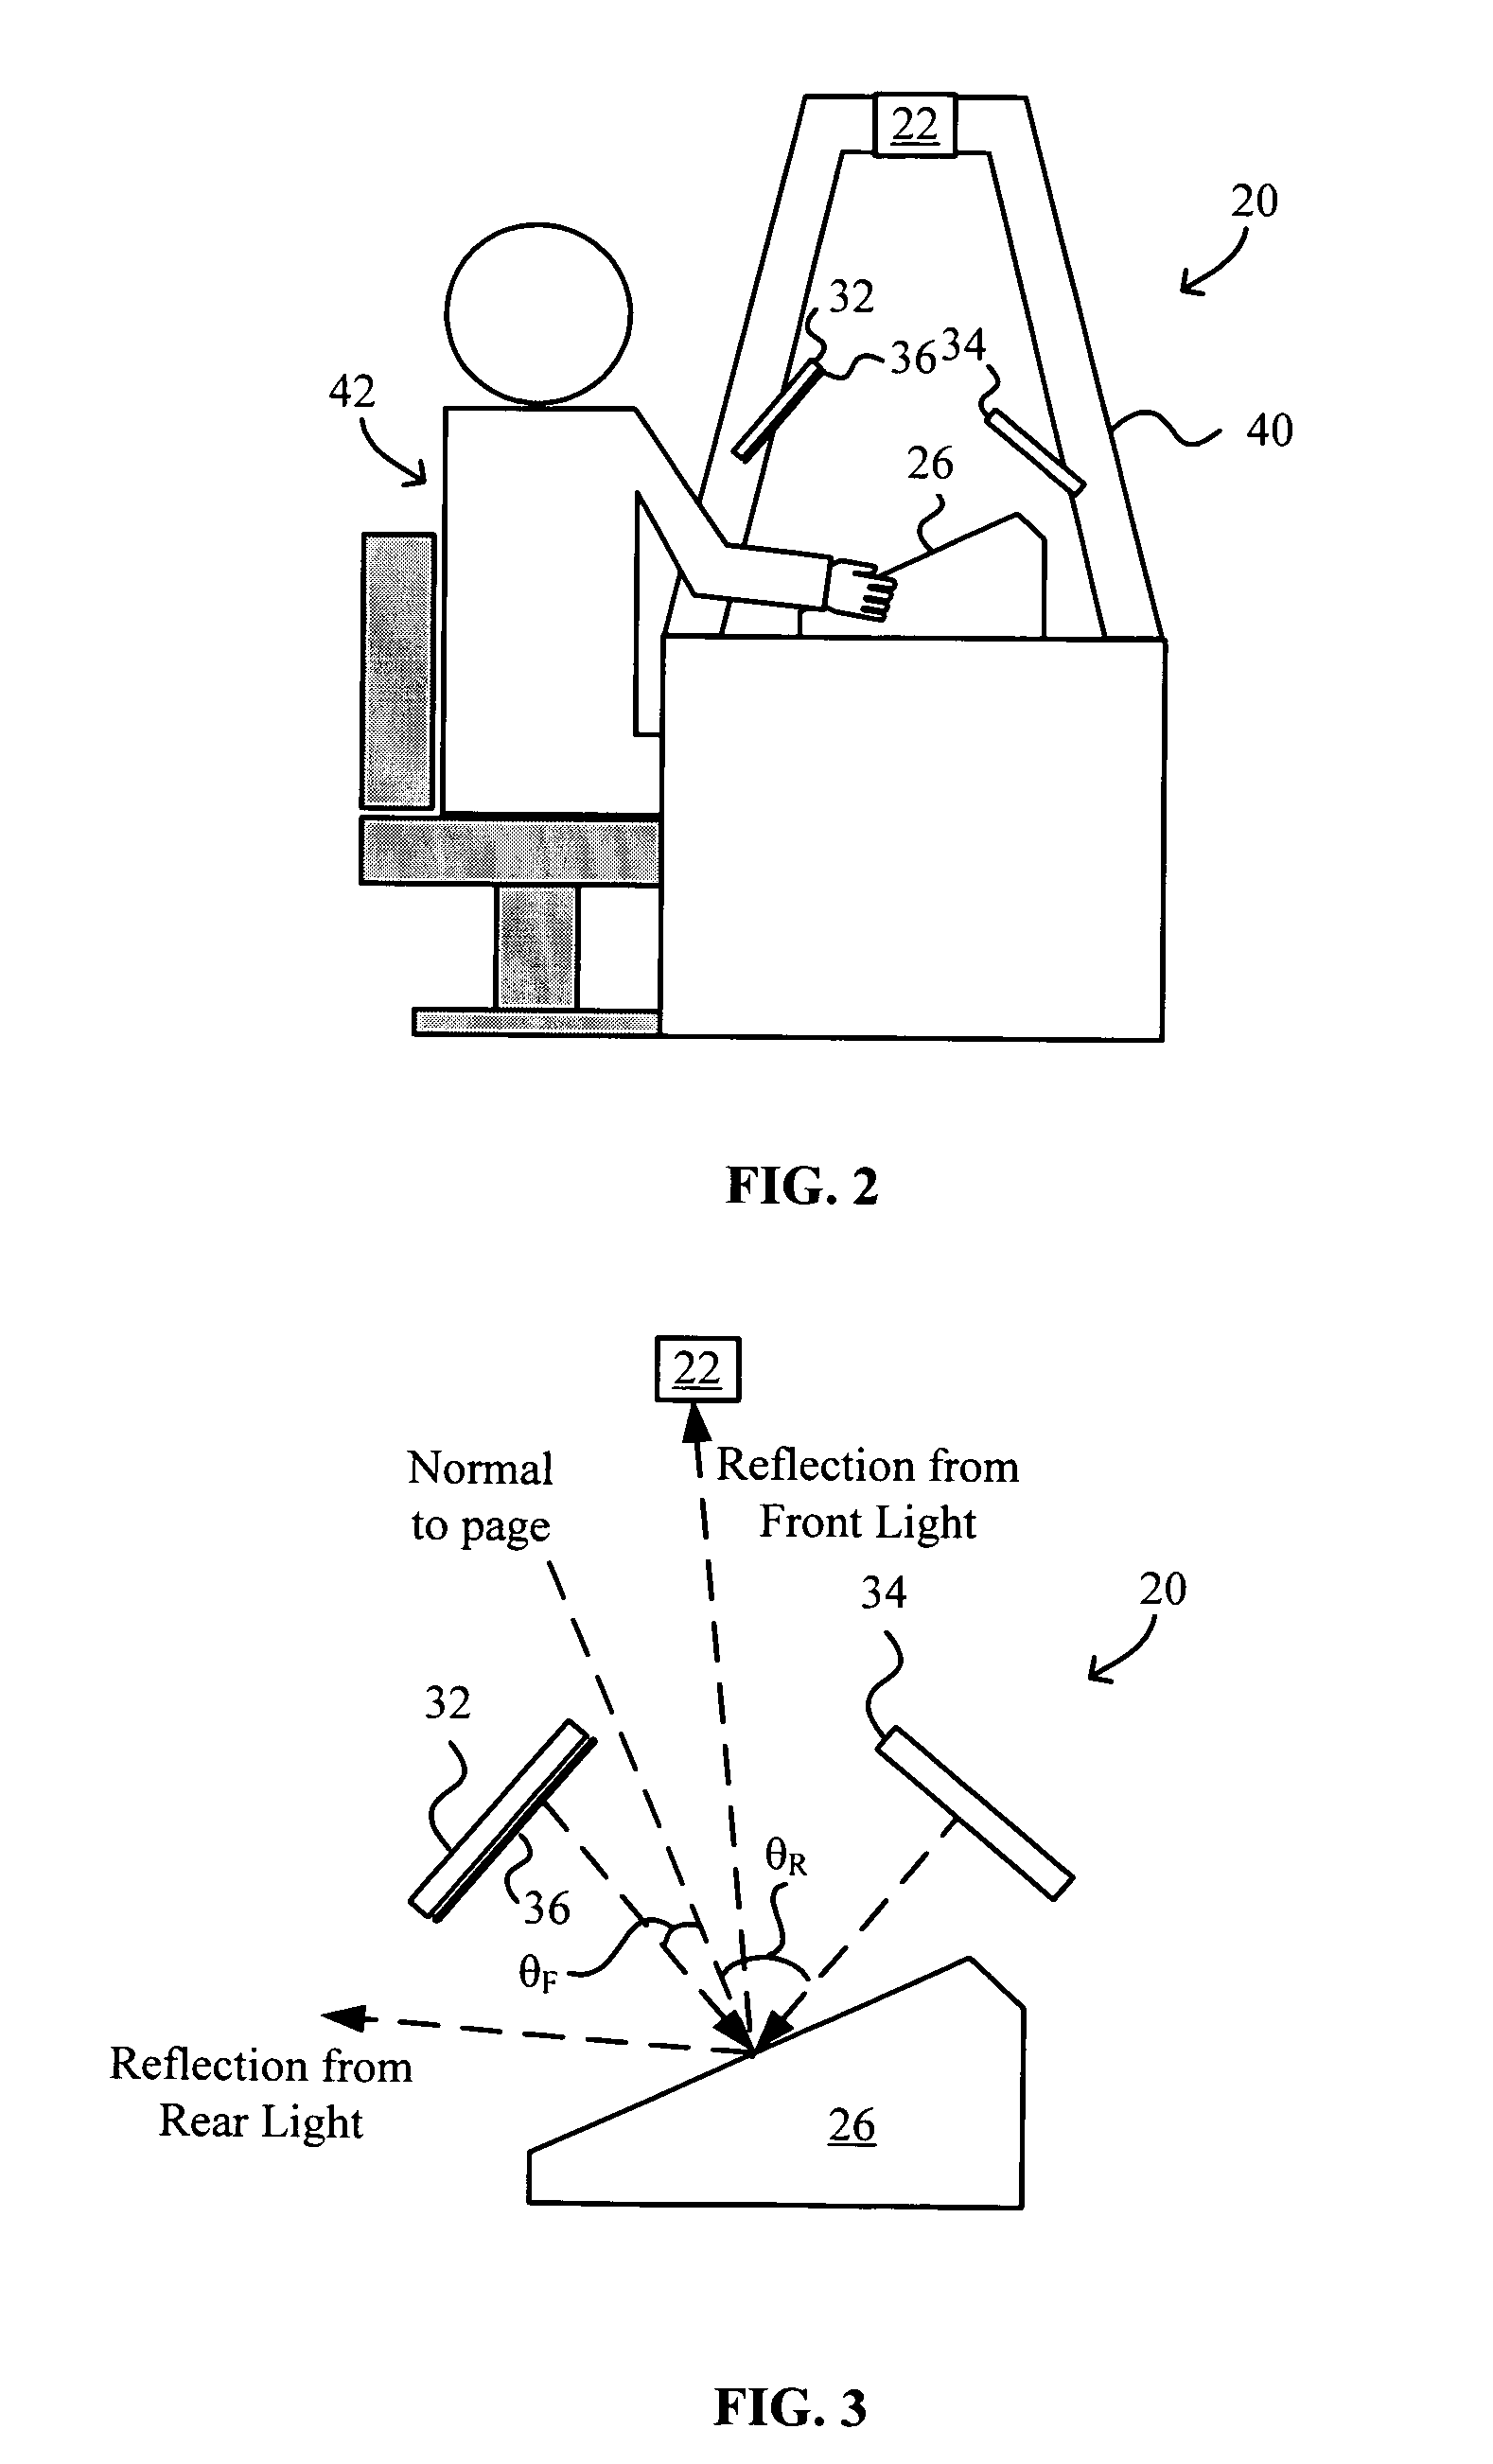 Systems and methods for glare removal using polarized filtering in document scanning